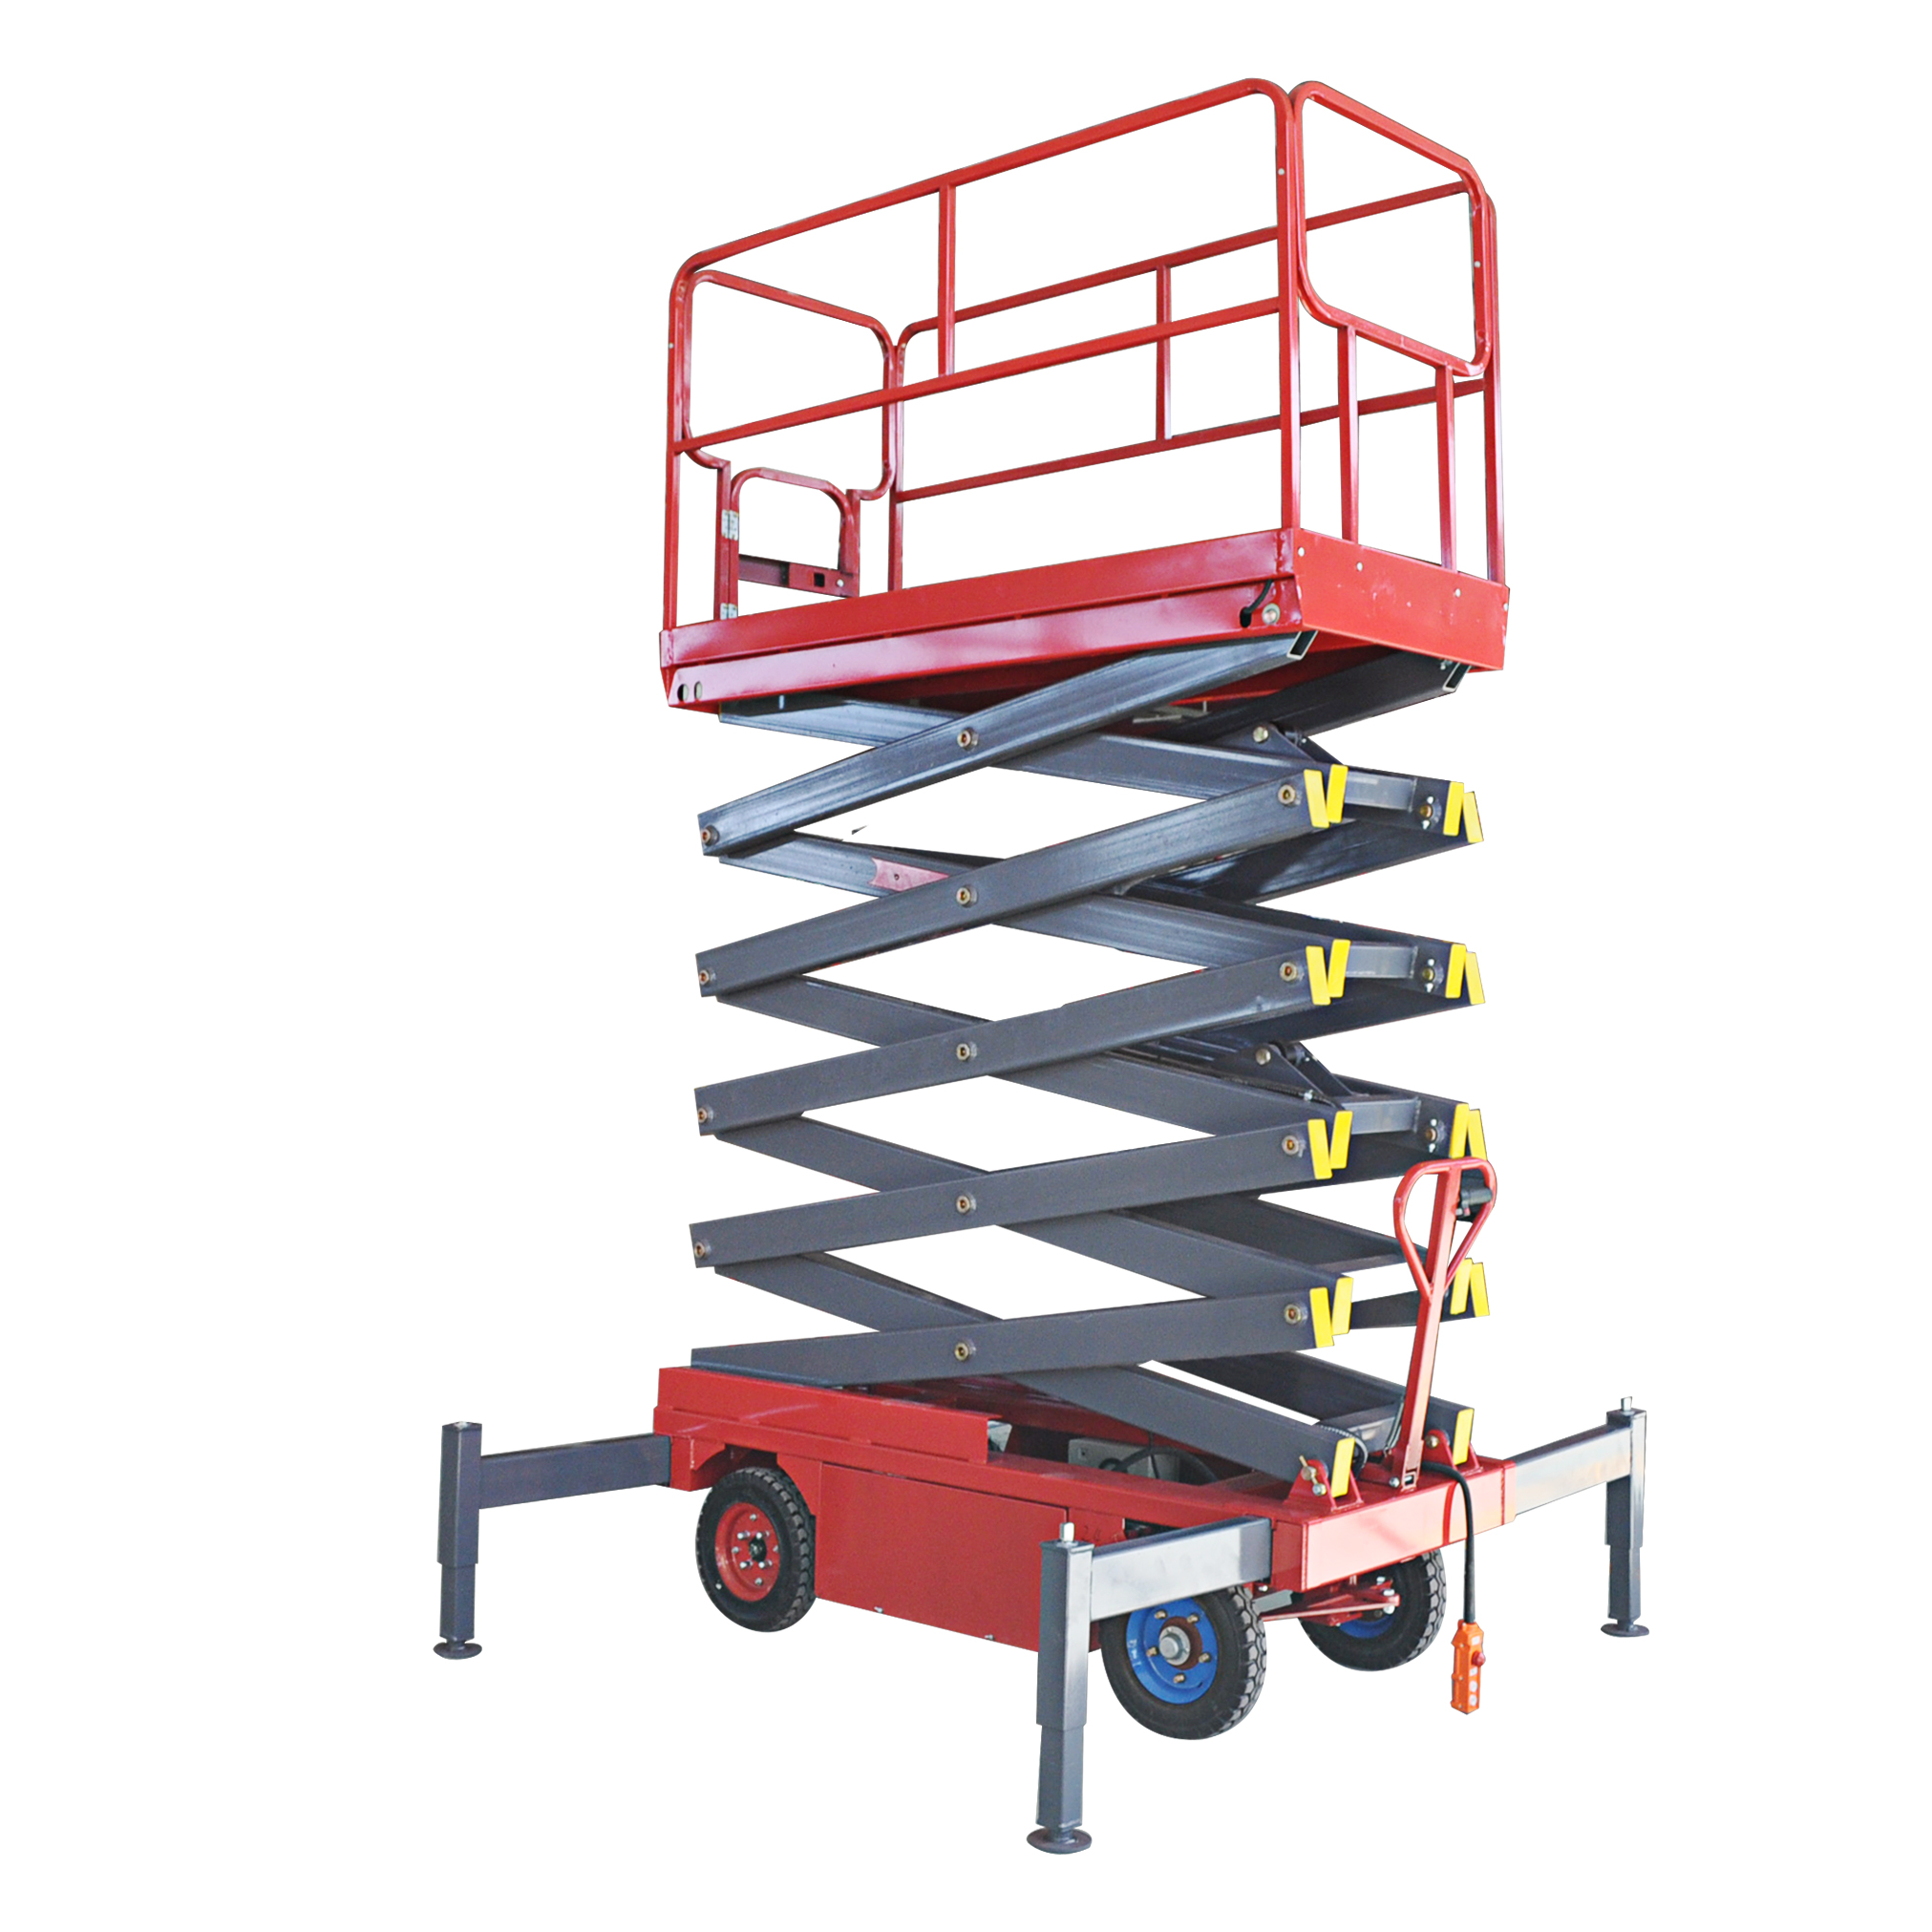 How to start a hydraulic lift rental business?